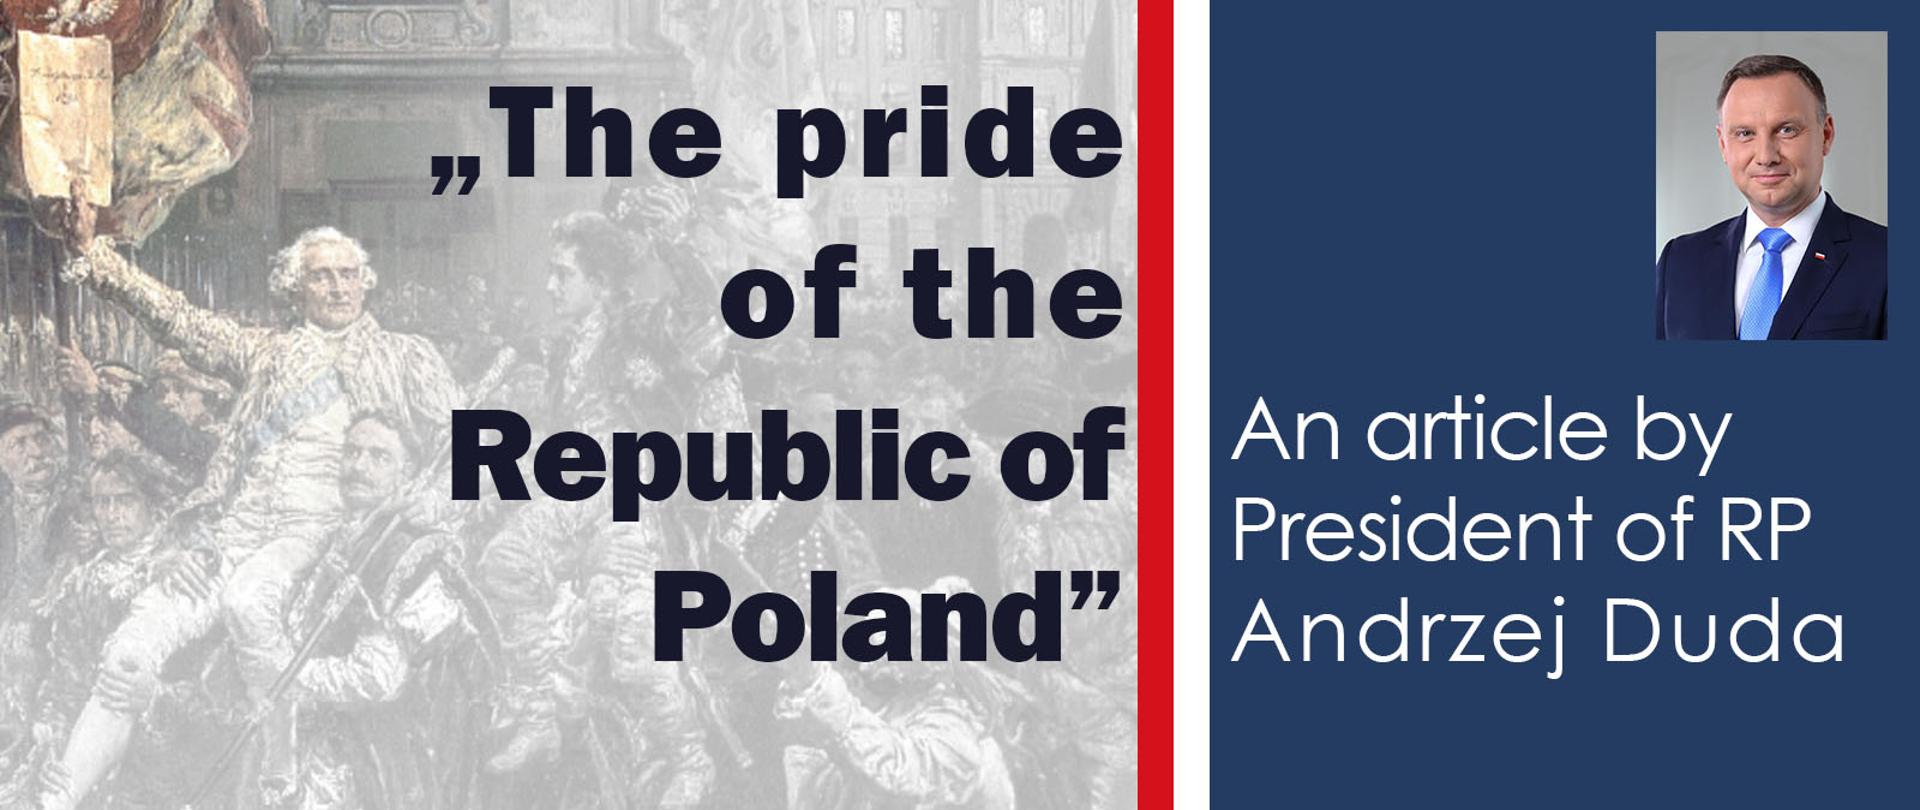 An article by President Andrzej Duda